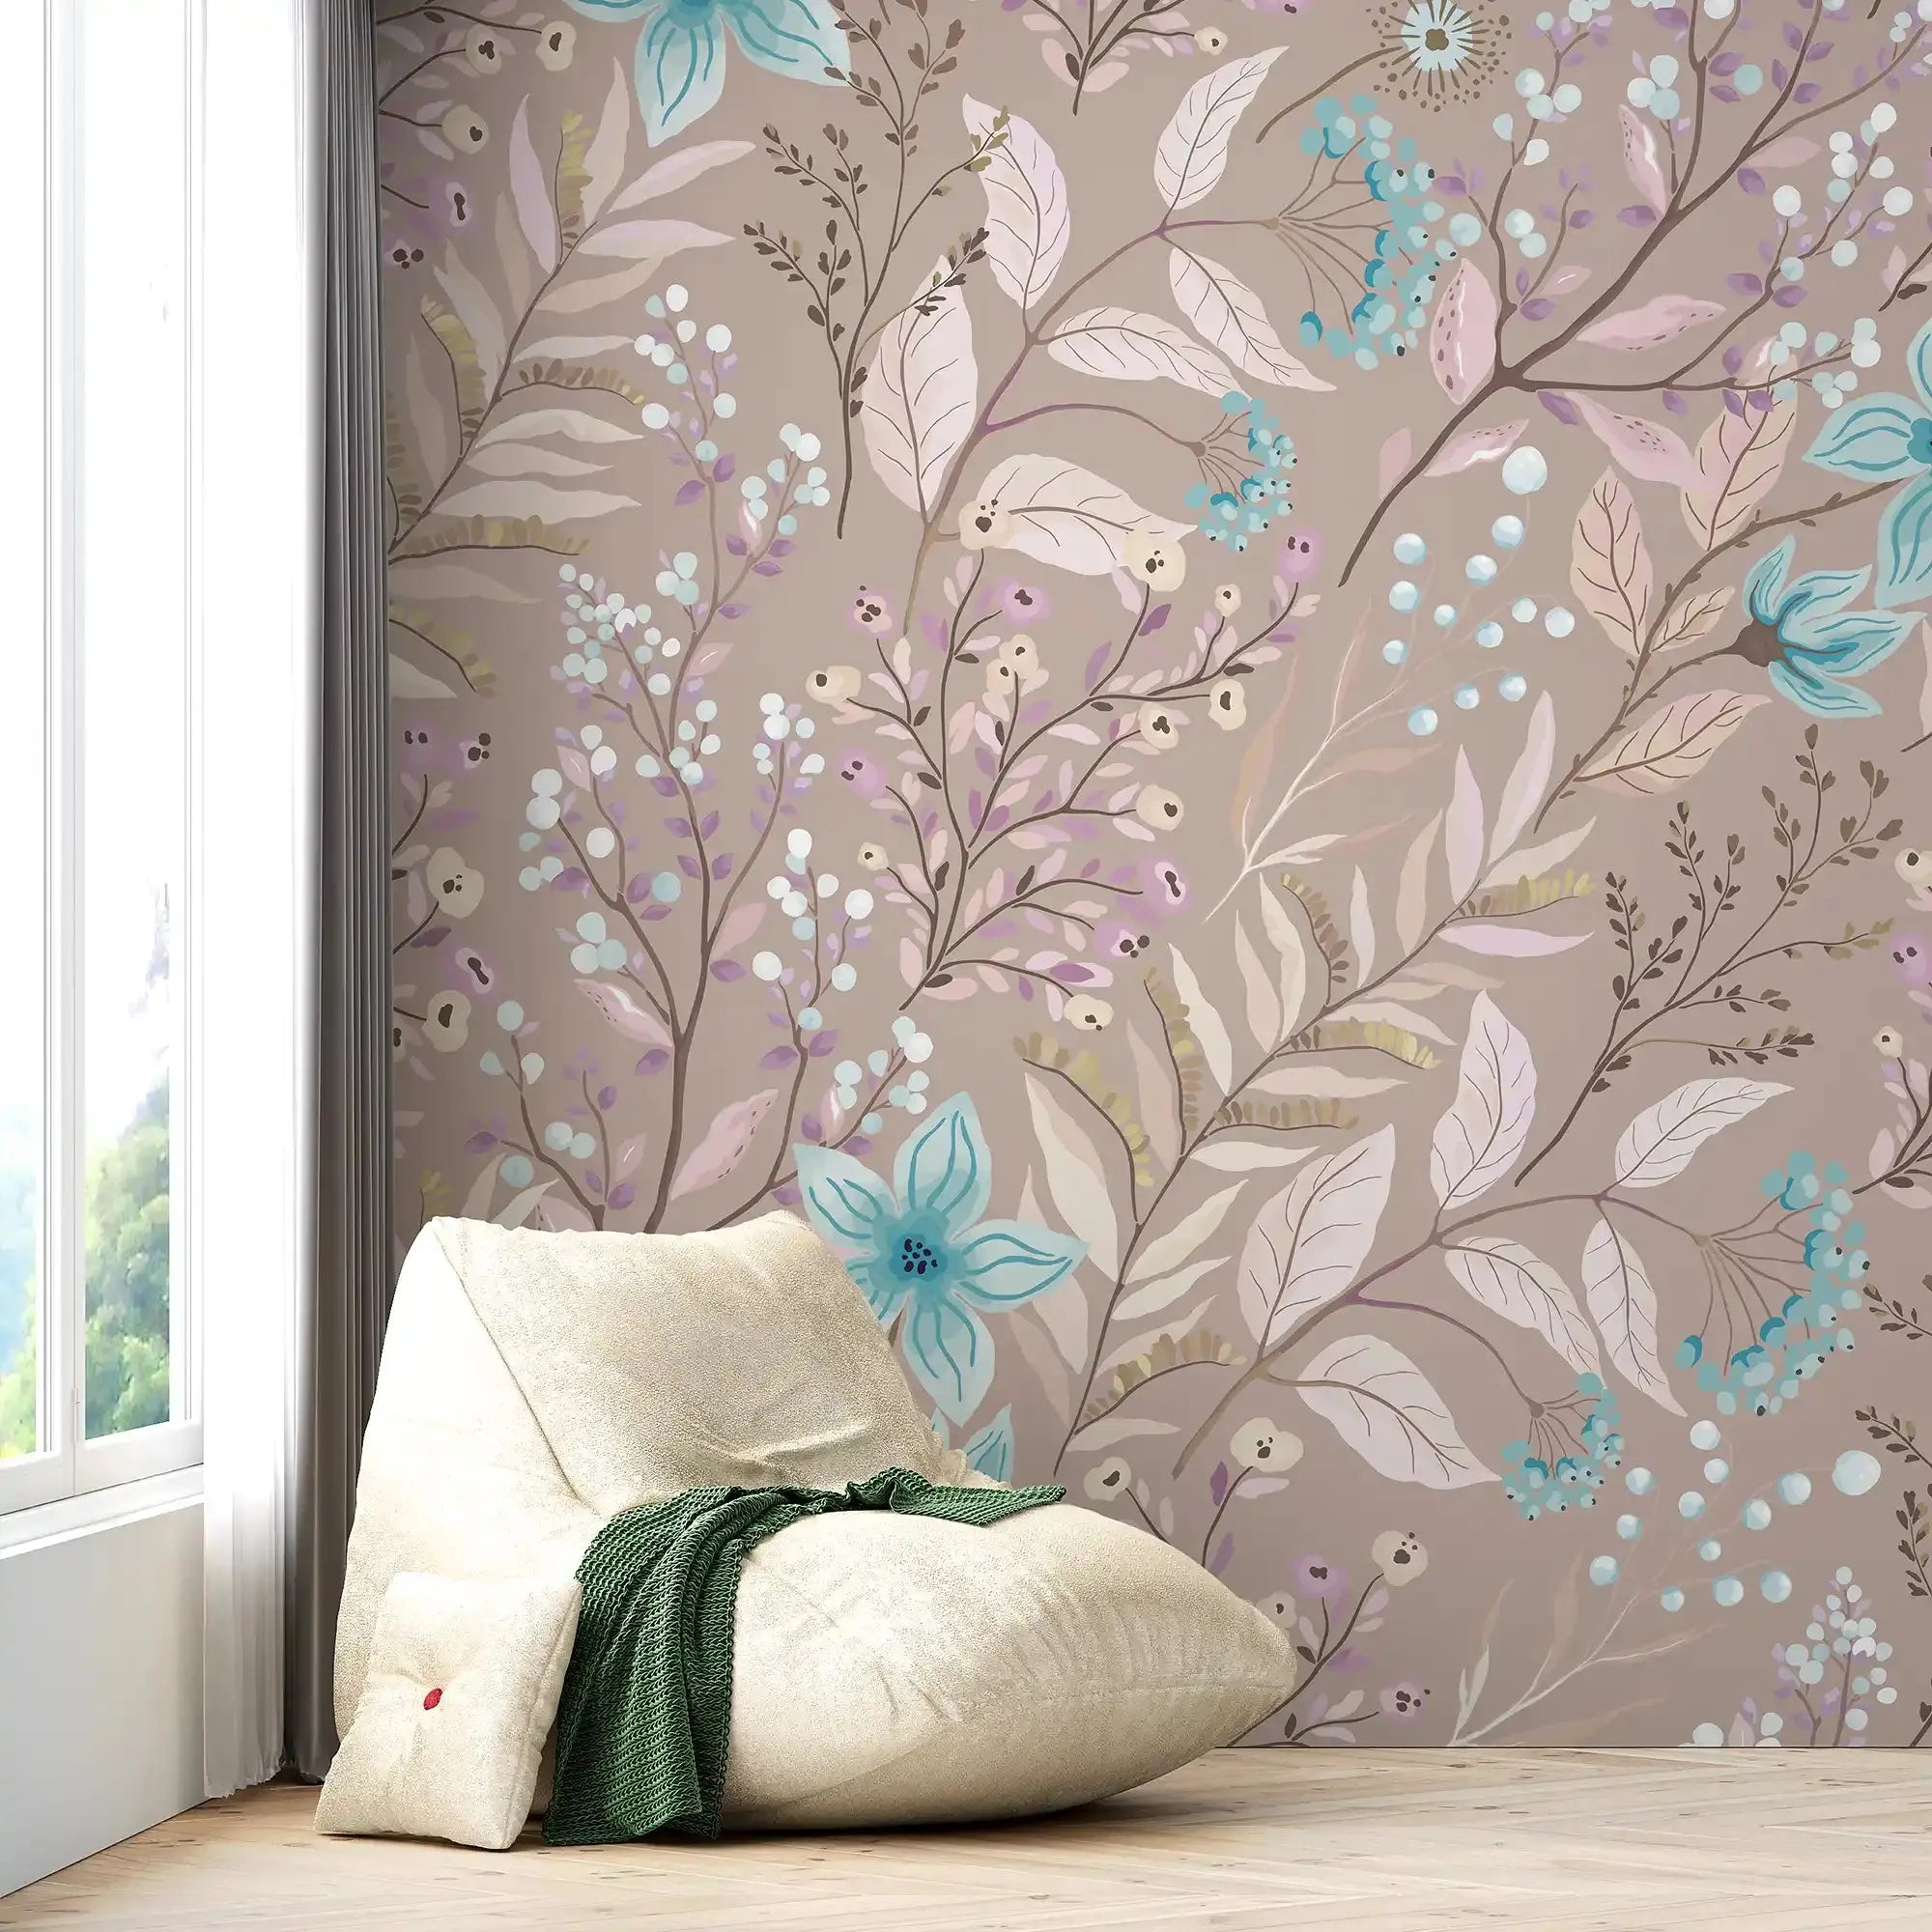 3105-E / Peel and Stick Floral Wallpaper: Pink Flowers and Leaf Design, Easy Apply Wall Decor for Bedroom & Bathroom - Artevella